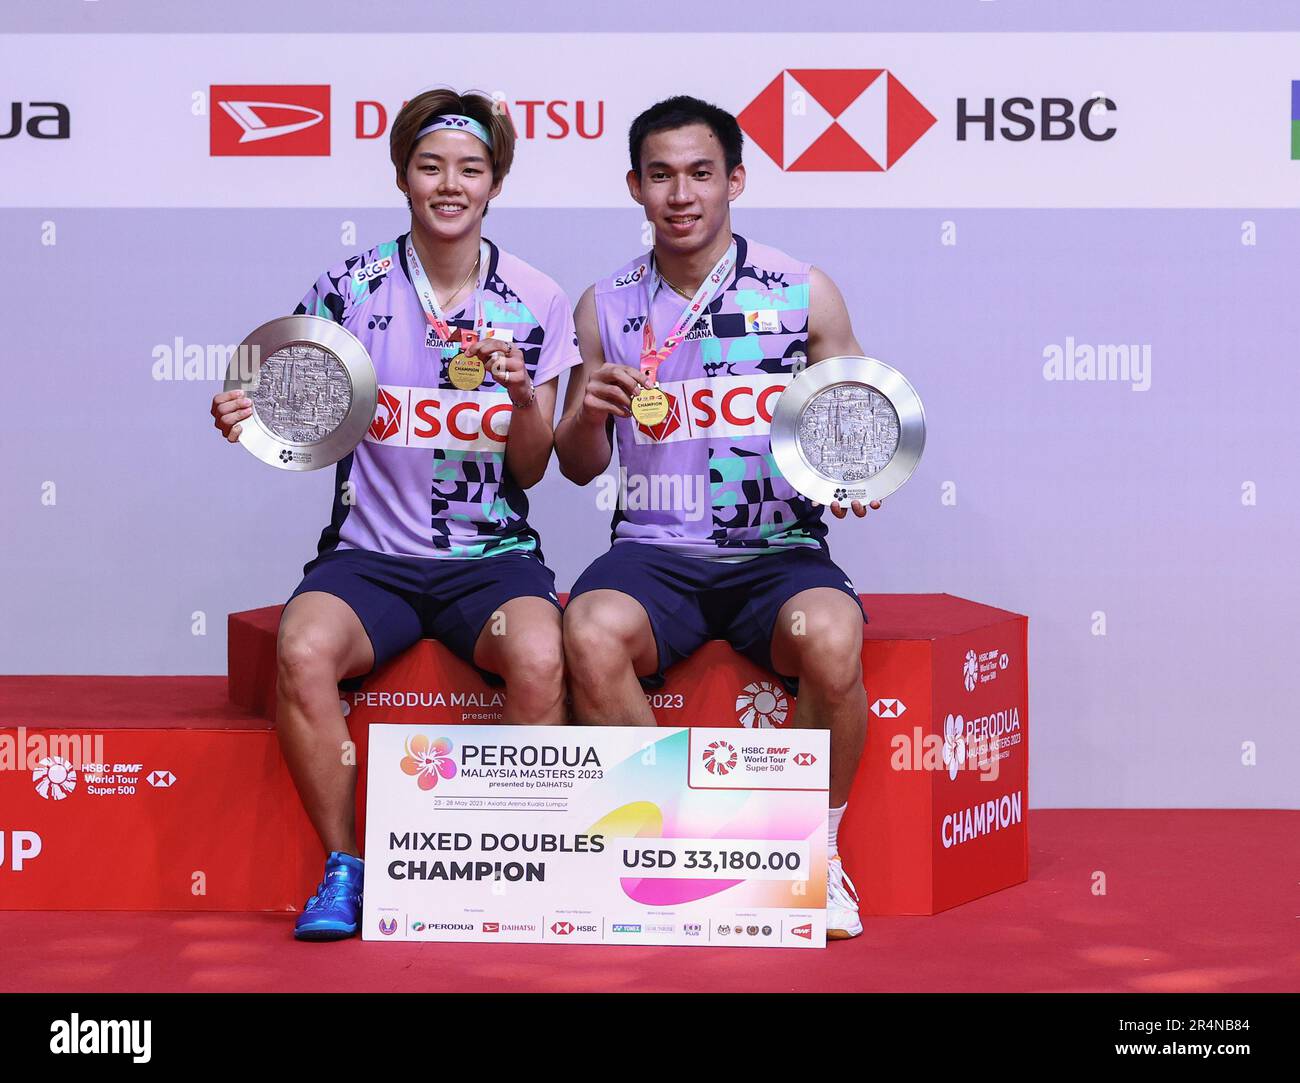 Dechapol Puavaranukroh (R) and Sapsiree Taerattanachai (L) of Thailand seen in action during the Badminton Mixed double in the HSBC BWF World Tour Finals 2022 at Nimibutr Stadium